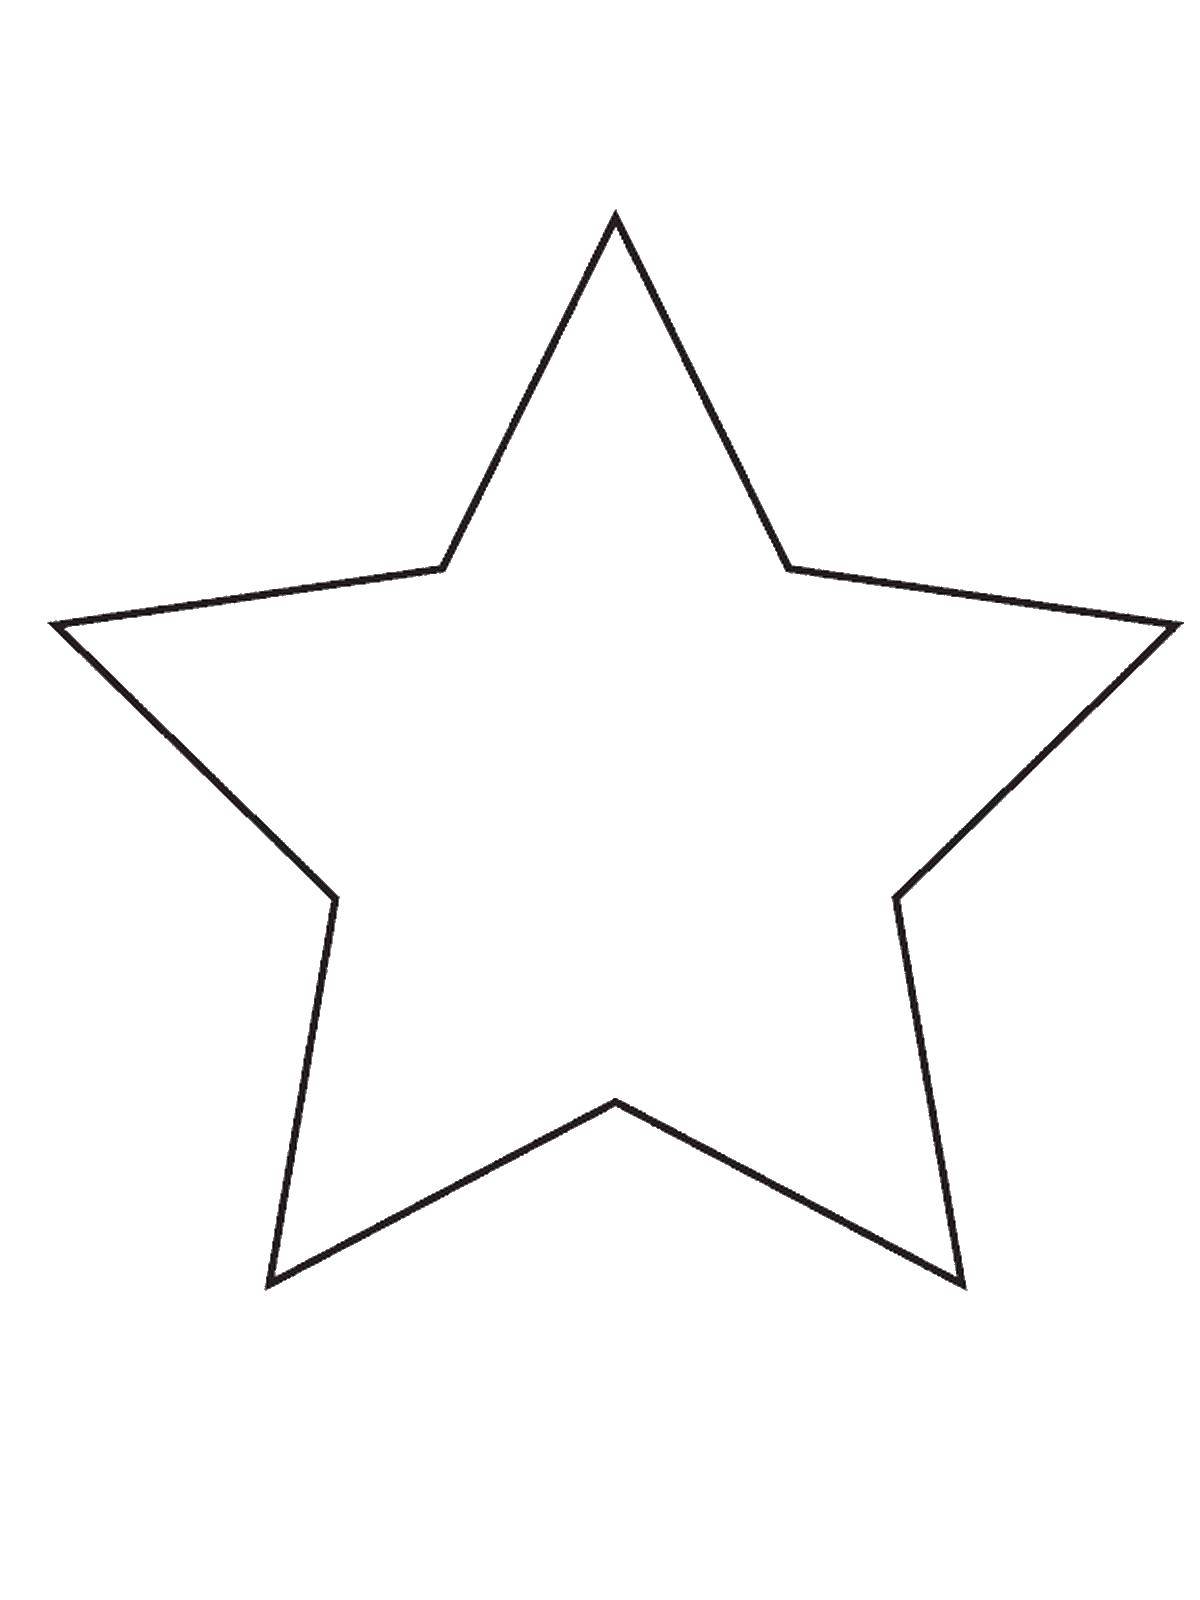 Coloring Star. Category coloring of the figures. Tags:  star.